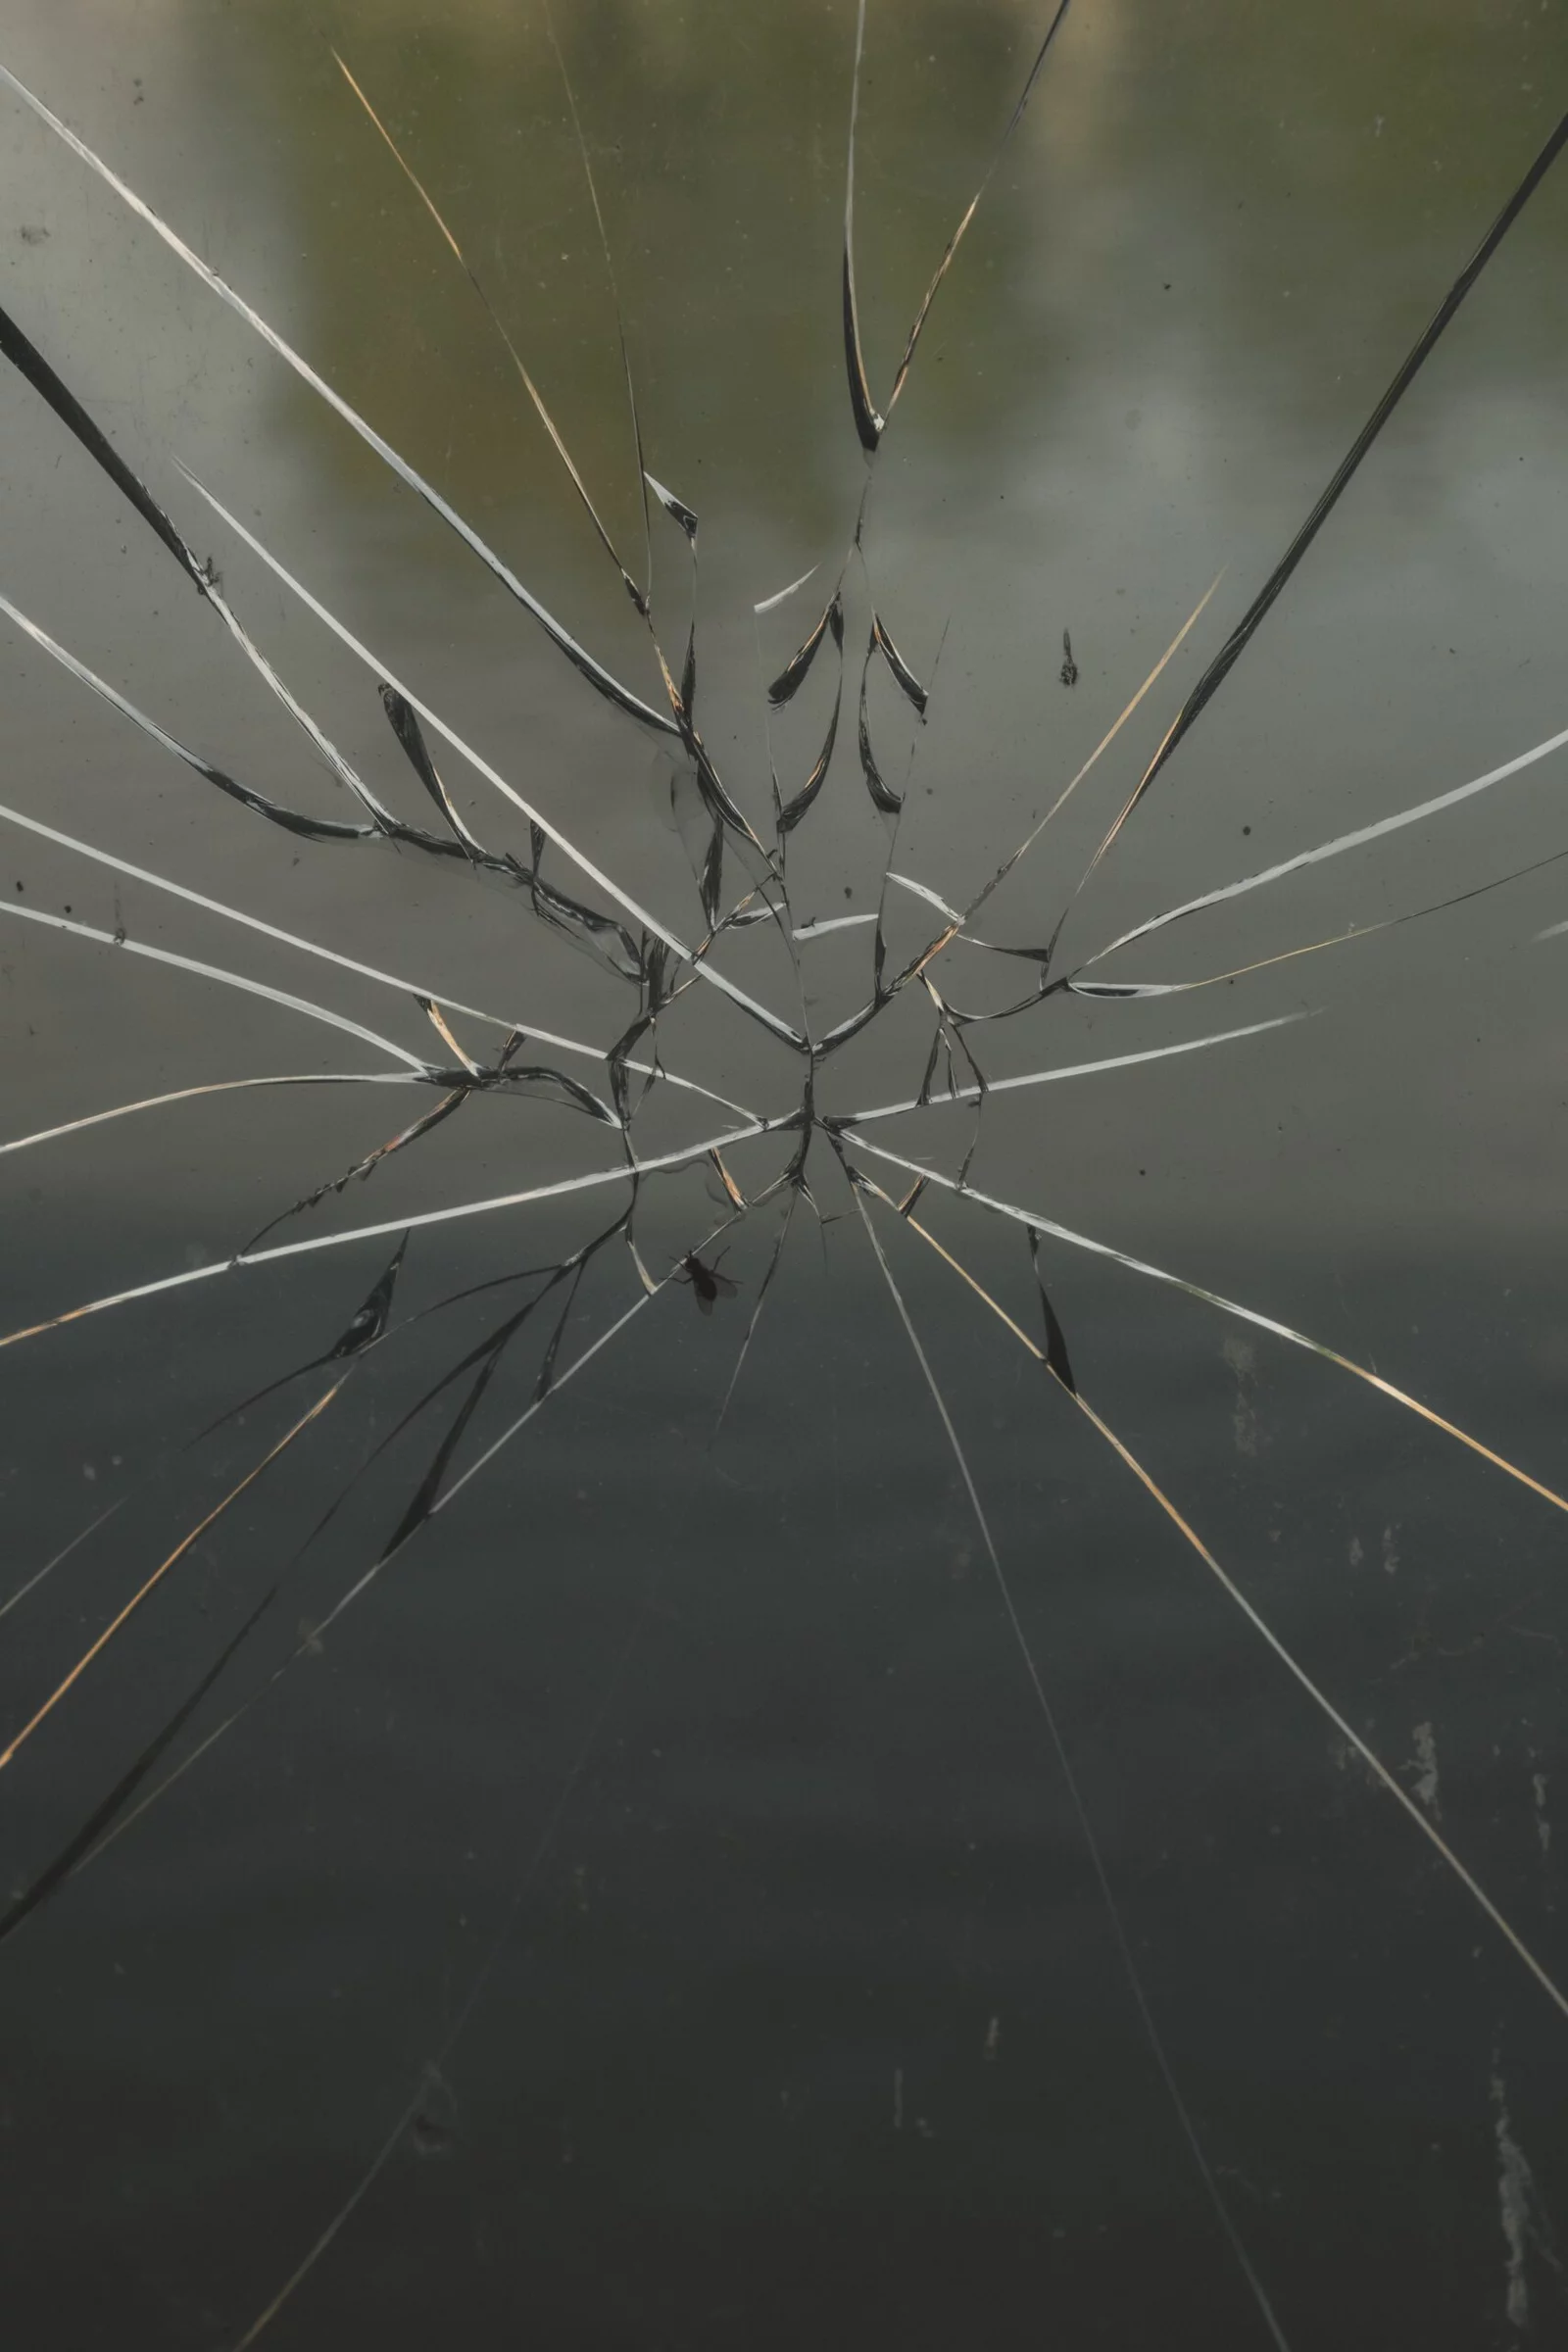 How to Safely Dispose of Broken Glass to Avoid Injuries